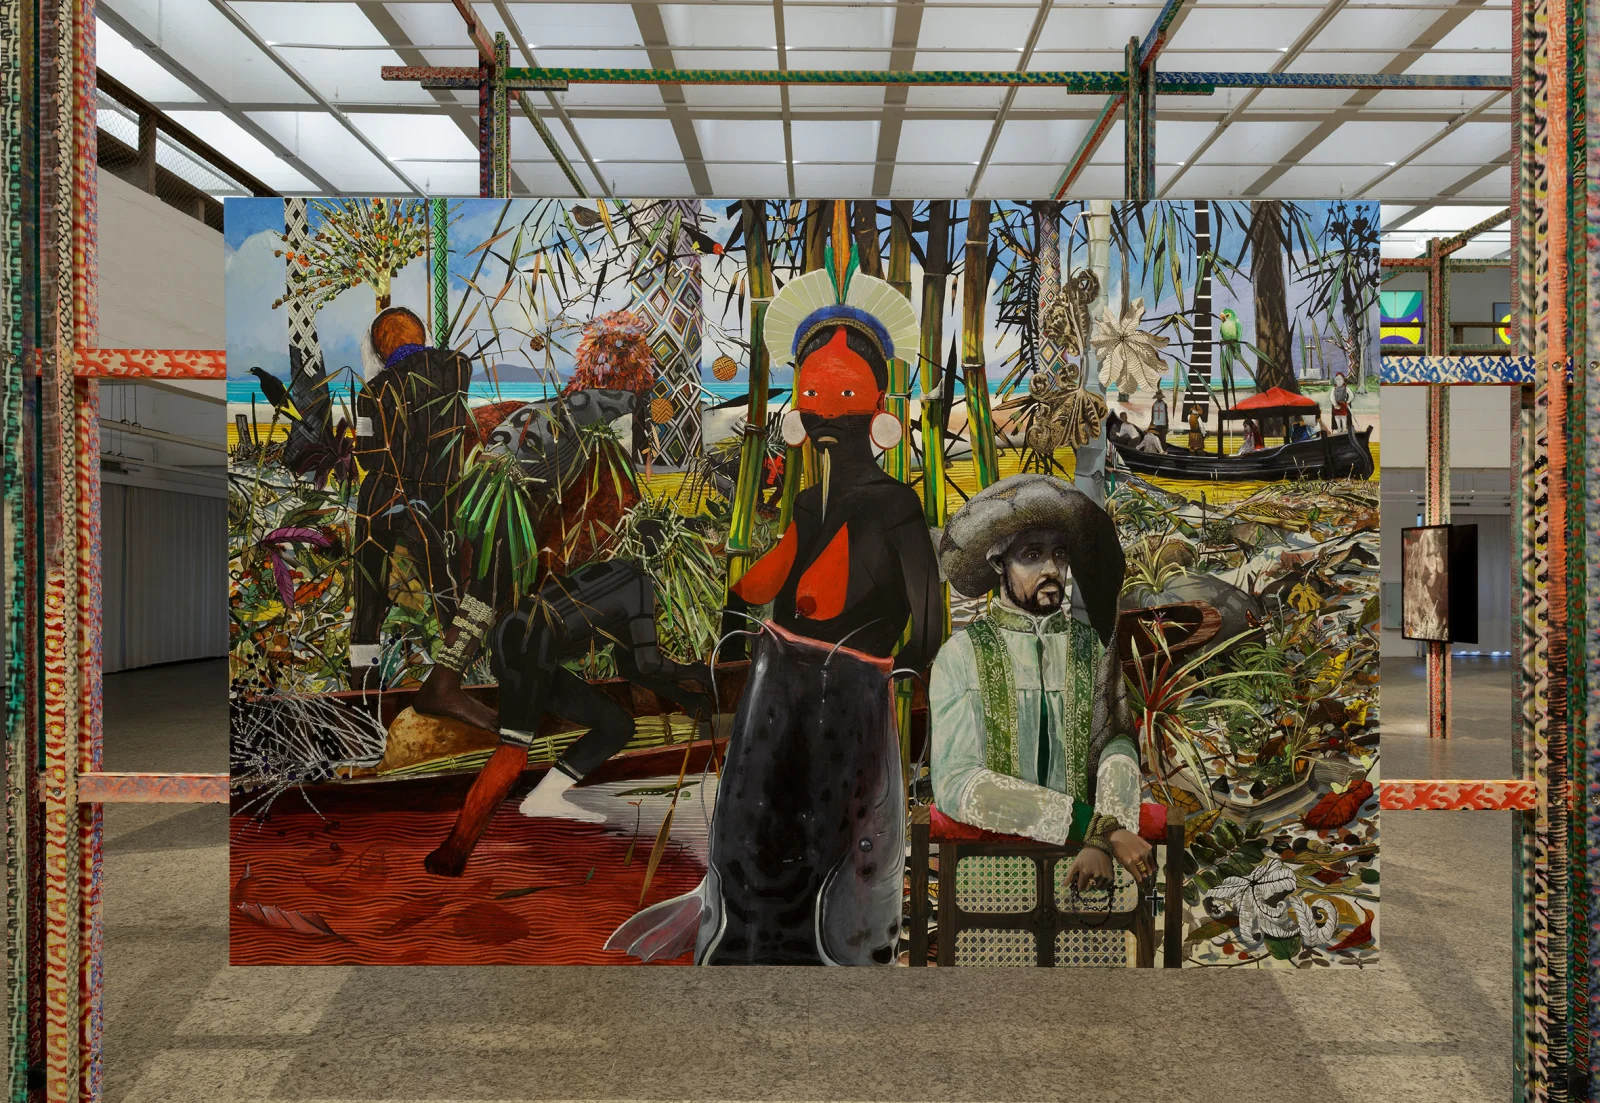 <p>'Primeira missa [First Mass]' , 2014, Acrylic on canvas, 200 x 300 cm - Acquired by MASP, São Paulo, Brazil, 2022</p><p>Included in ‘Luiz Zerbini: The Same Story is Never the Same’ at Museu de Arte de São Paulo (MASP), São Paulo, Brazil, 2022</p><p> </p>